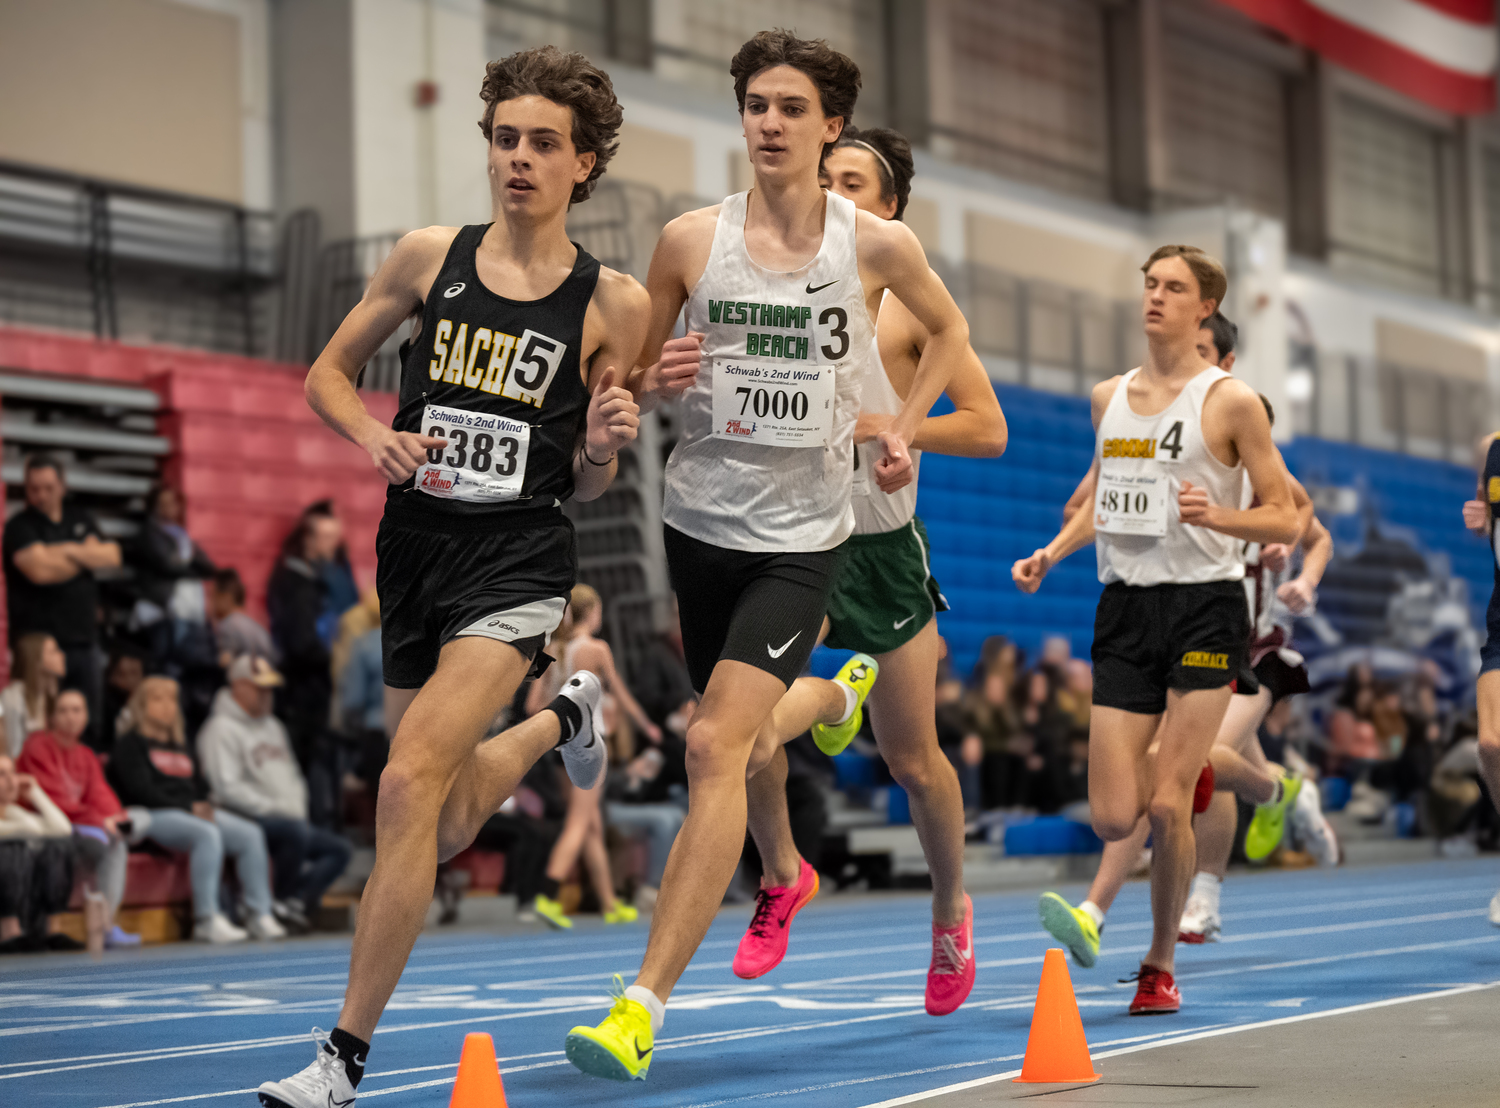 Westhampton Beach senior Trevor Hayes finished second in the county in the 1,600-meter race and will be competing at states next month.   RON ESPOSITO